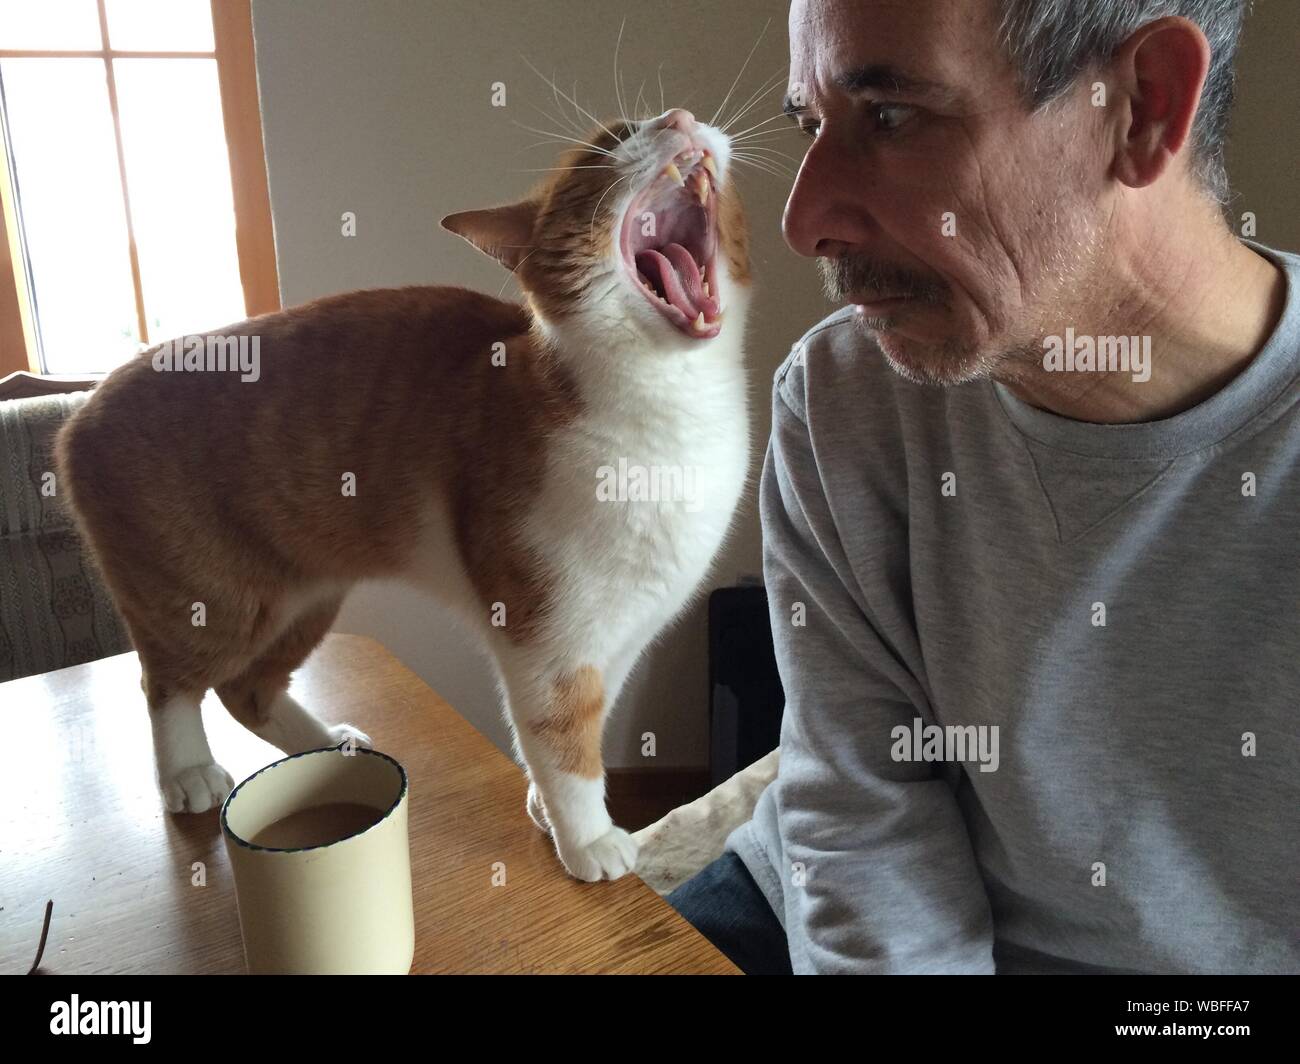 Angry Man Looking At Cat Yawning On Table Stock Photo - Alamy